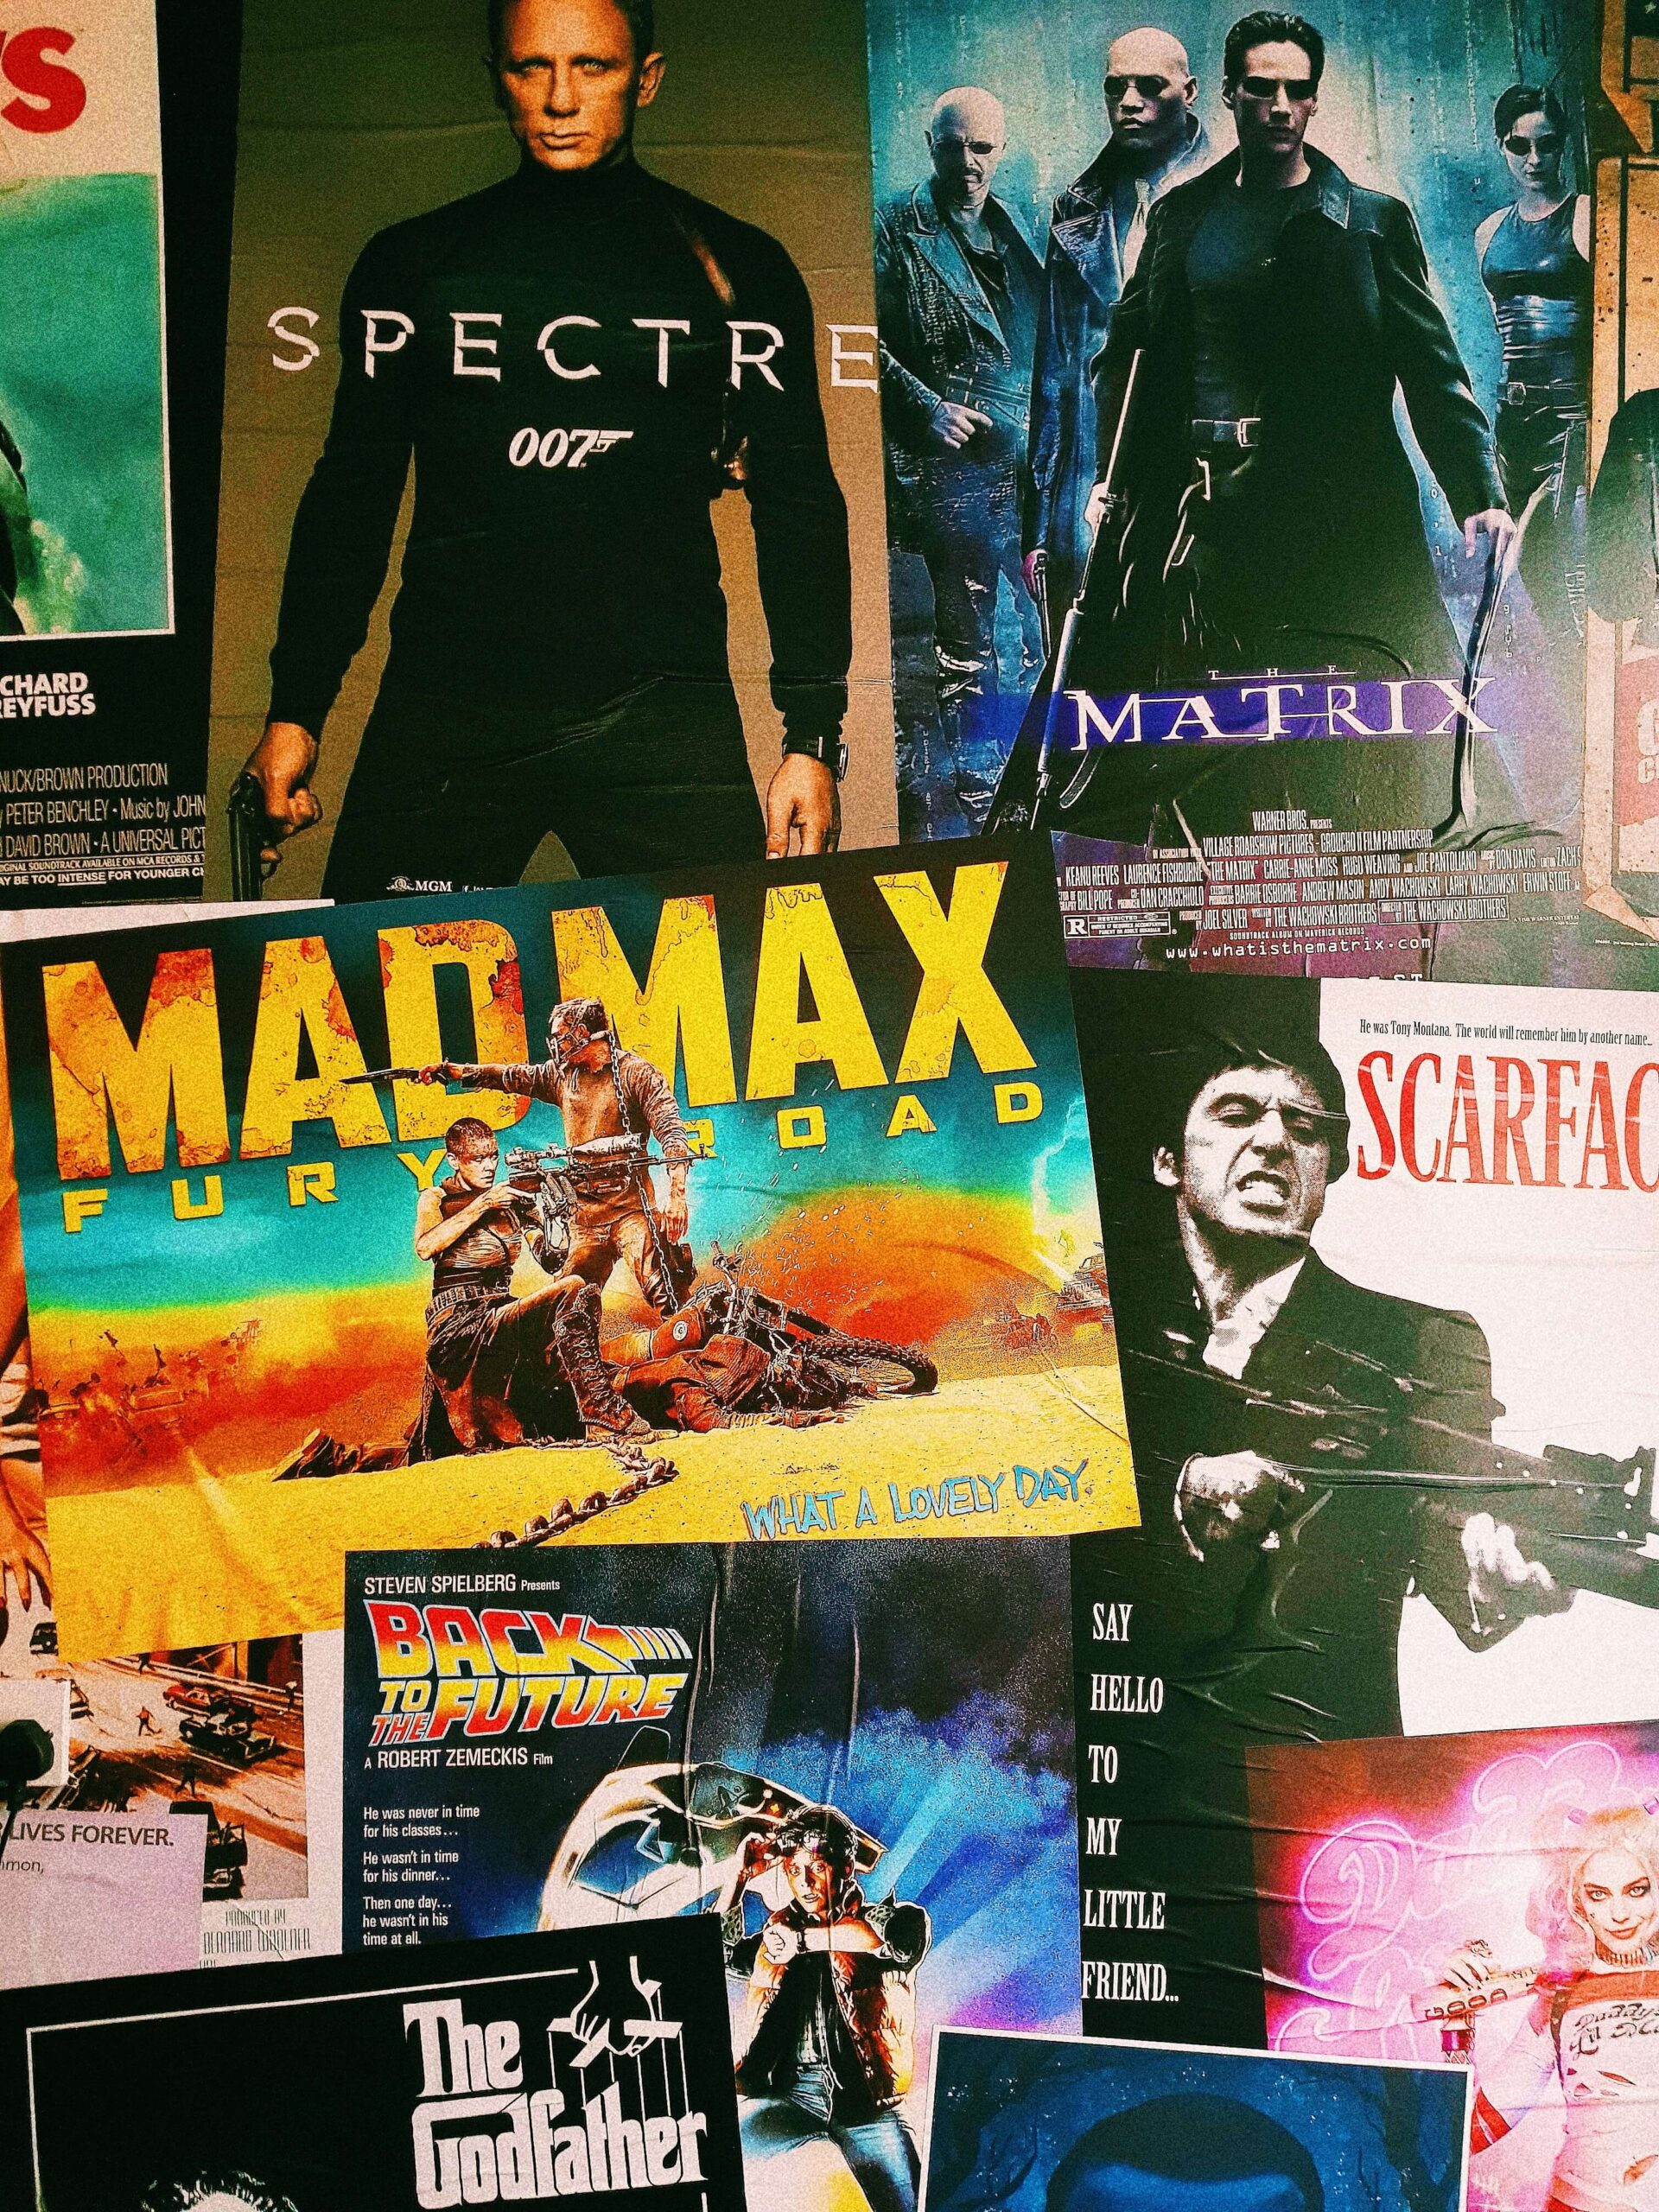 movie posters for Mad Max, Scarface, Spectre, and more